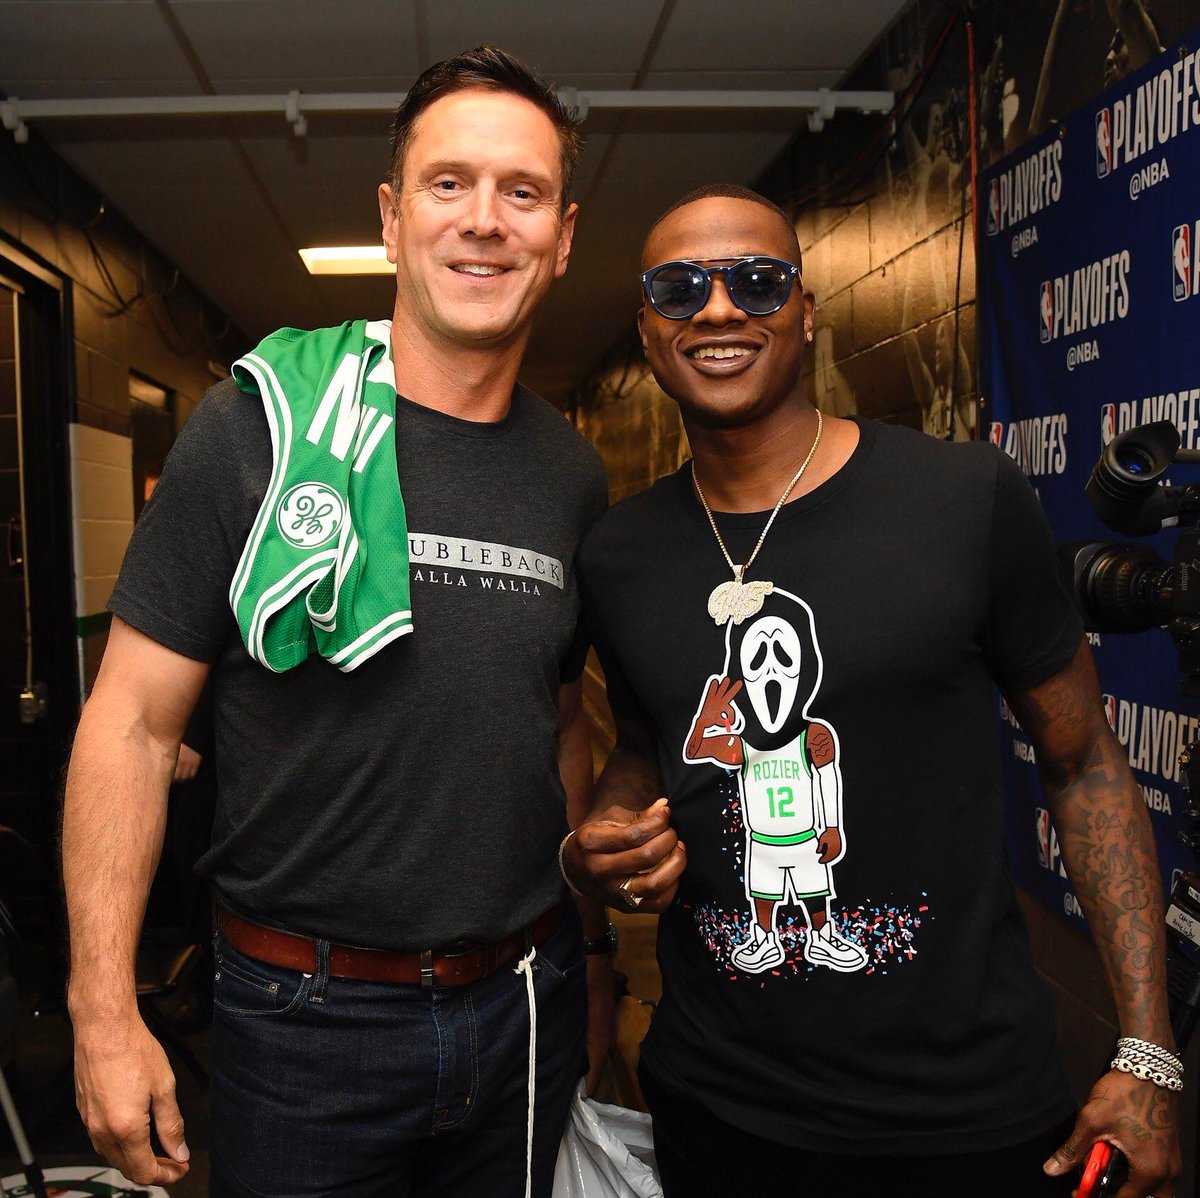 Drew Bledsoe and Scary Terry, real friends. (via @celtics)